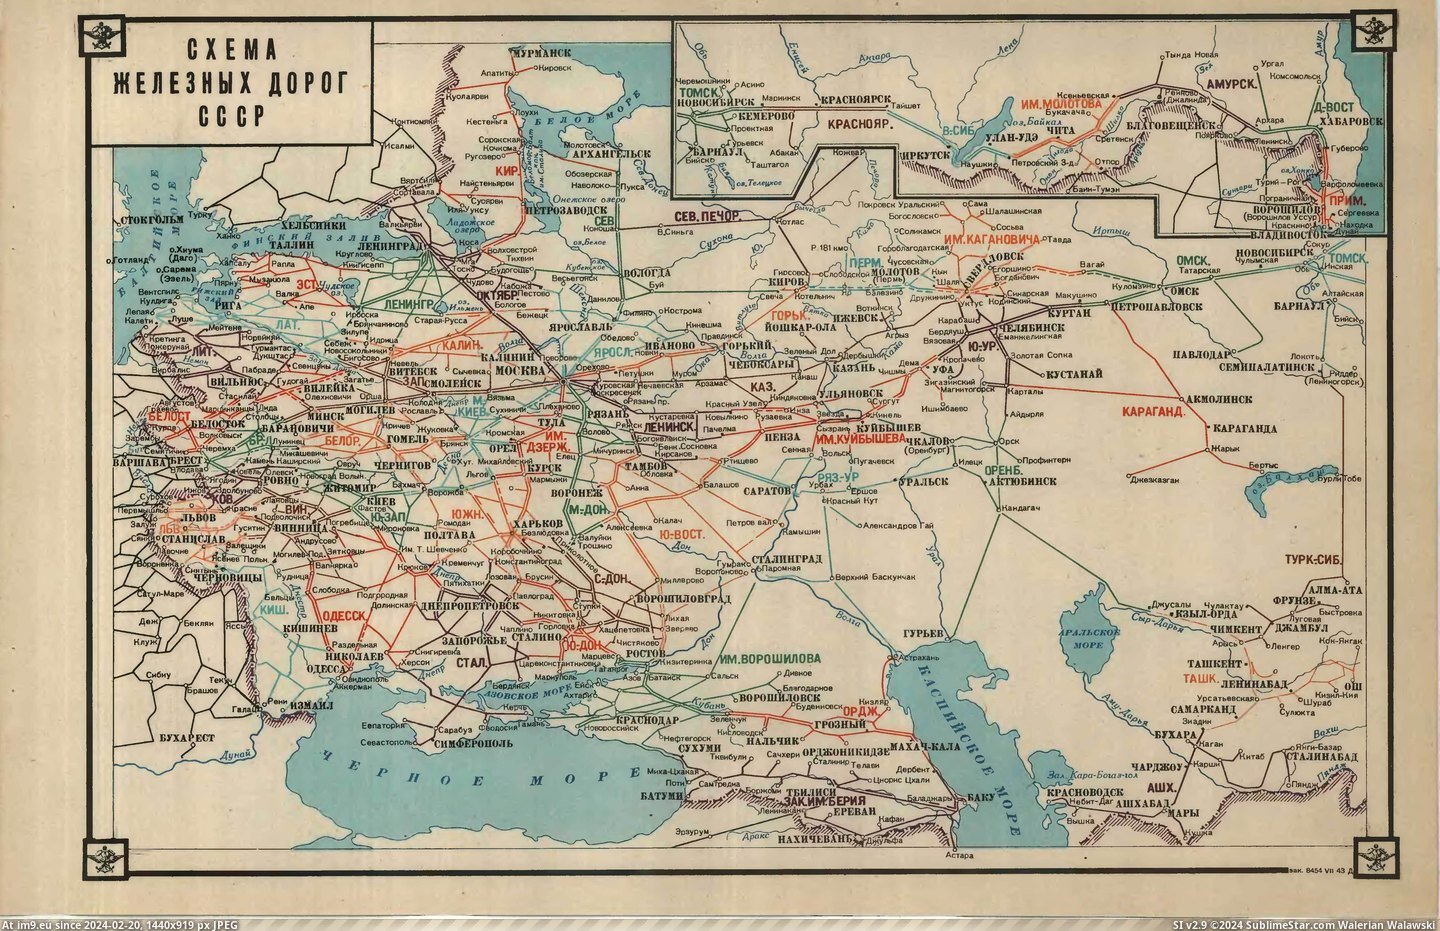 #Album #Military #Atlas #Railroad #Network [Mapporn] military atlas of the USSR railroad and waterway network in 1943 (album in comments) [5269x3375] Pic. (Изображение из альбом My r/MAPS favs))